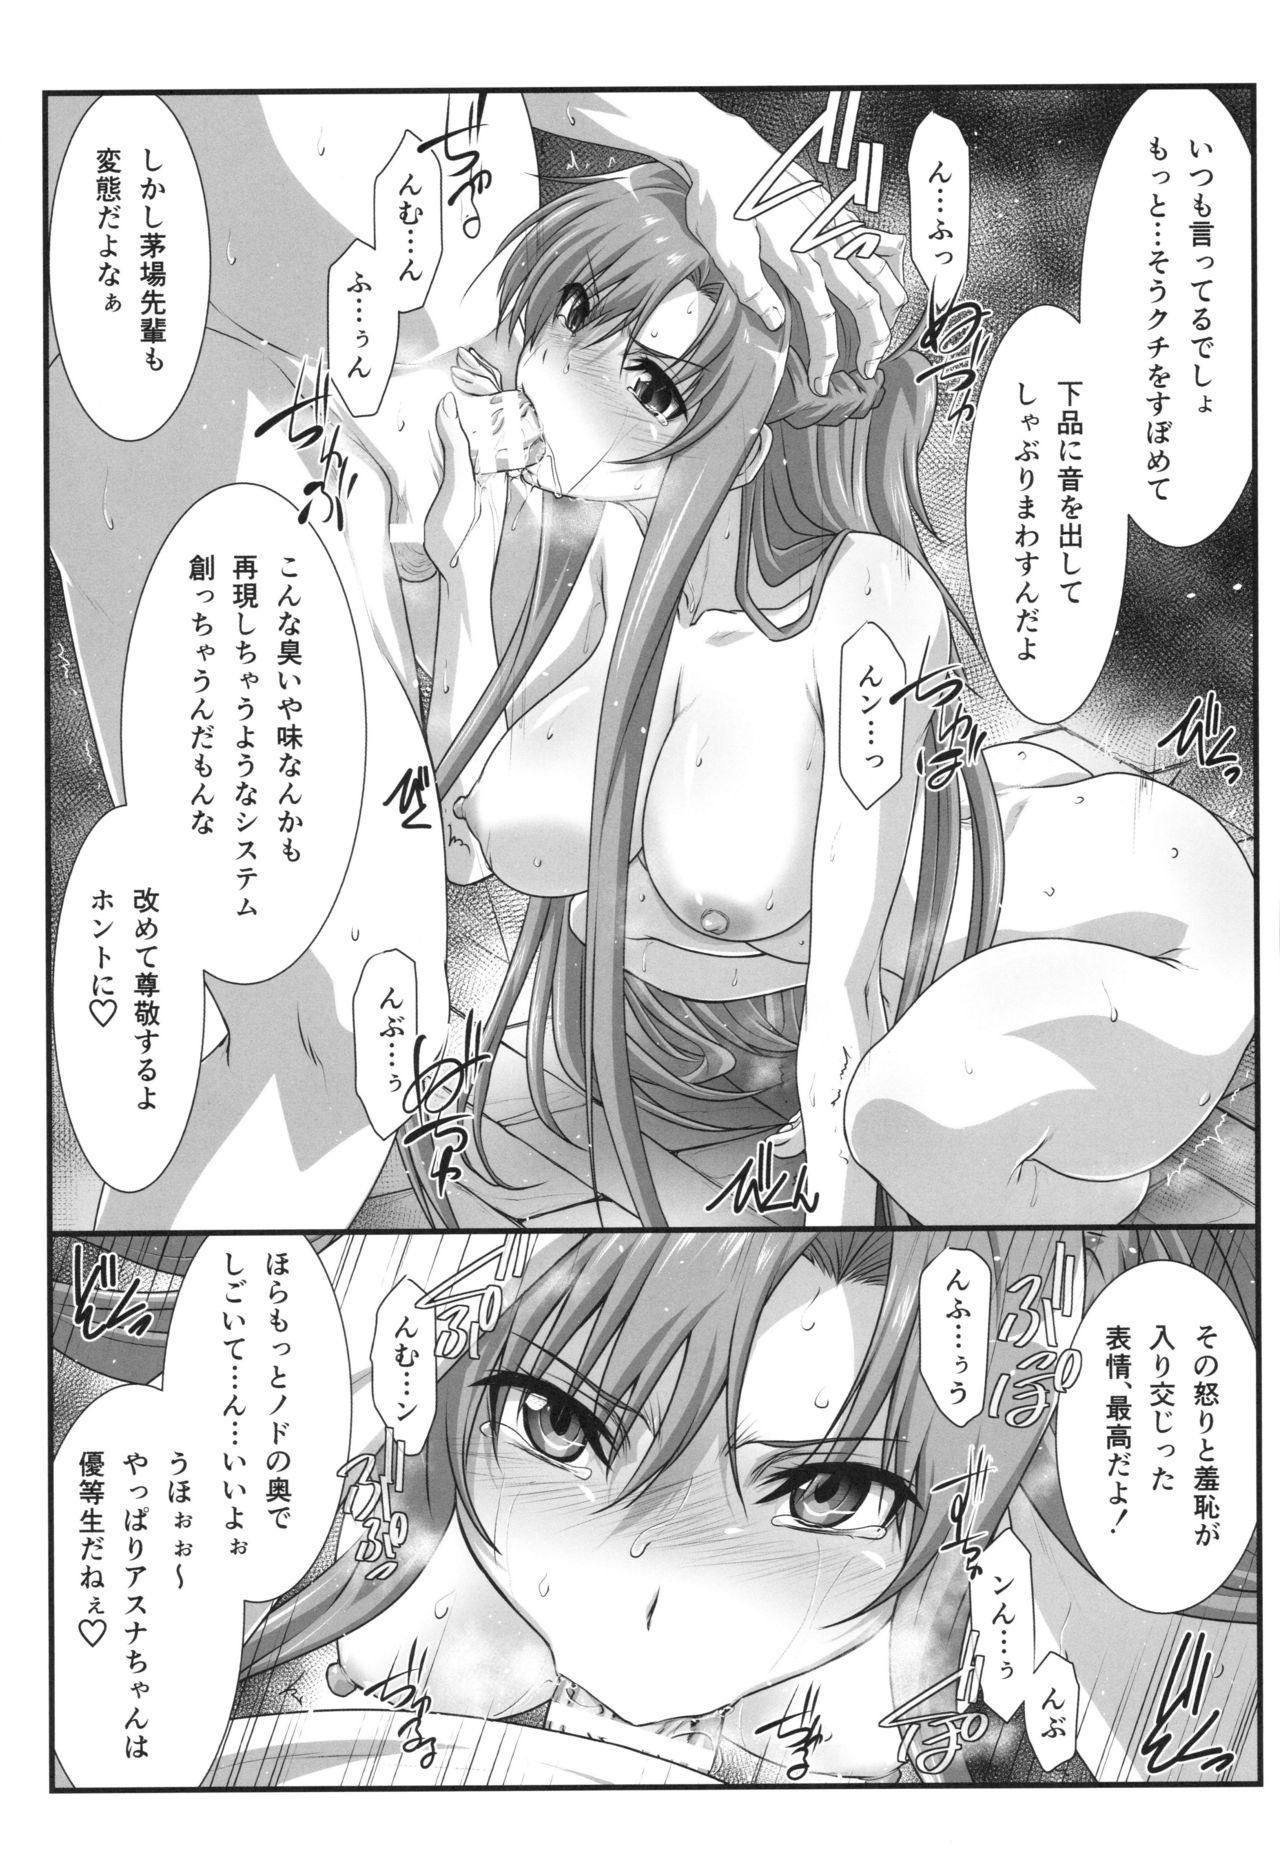 Rica Astral Bout Ver. 41 - Sword art online Teenage Sex - Page 6